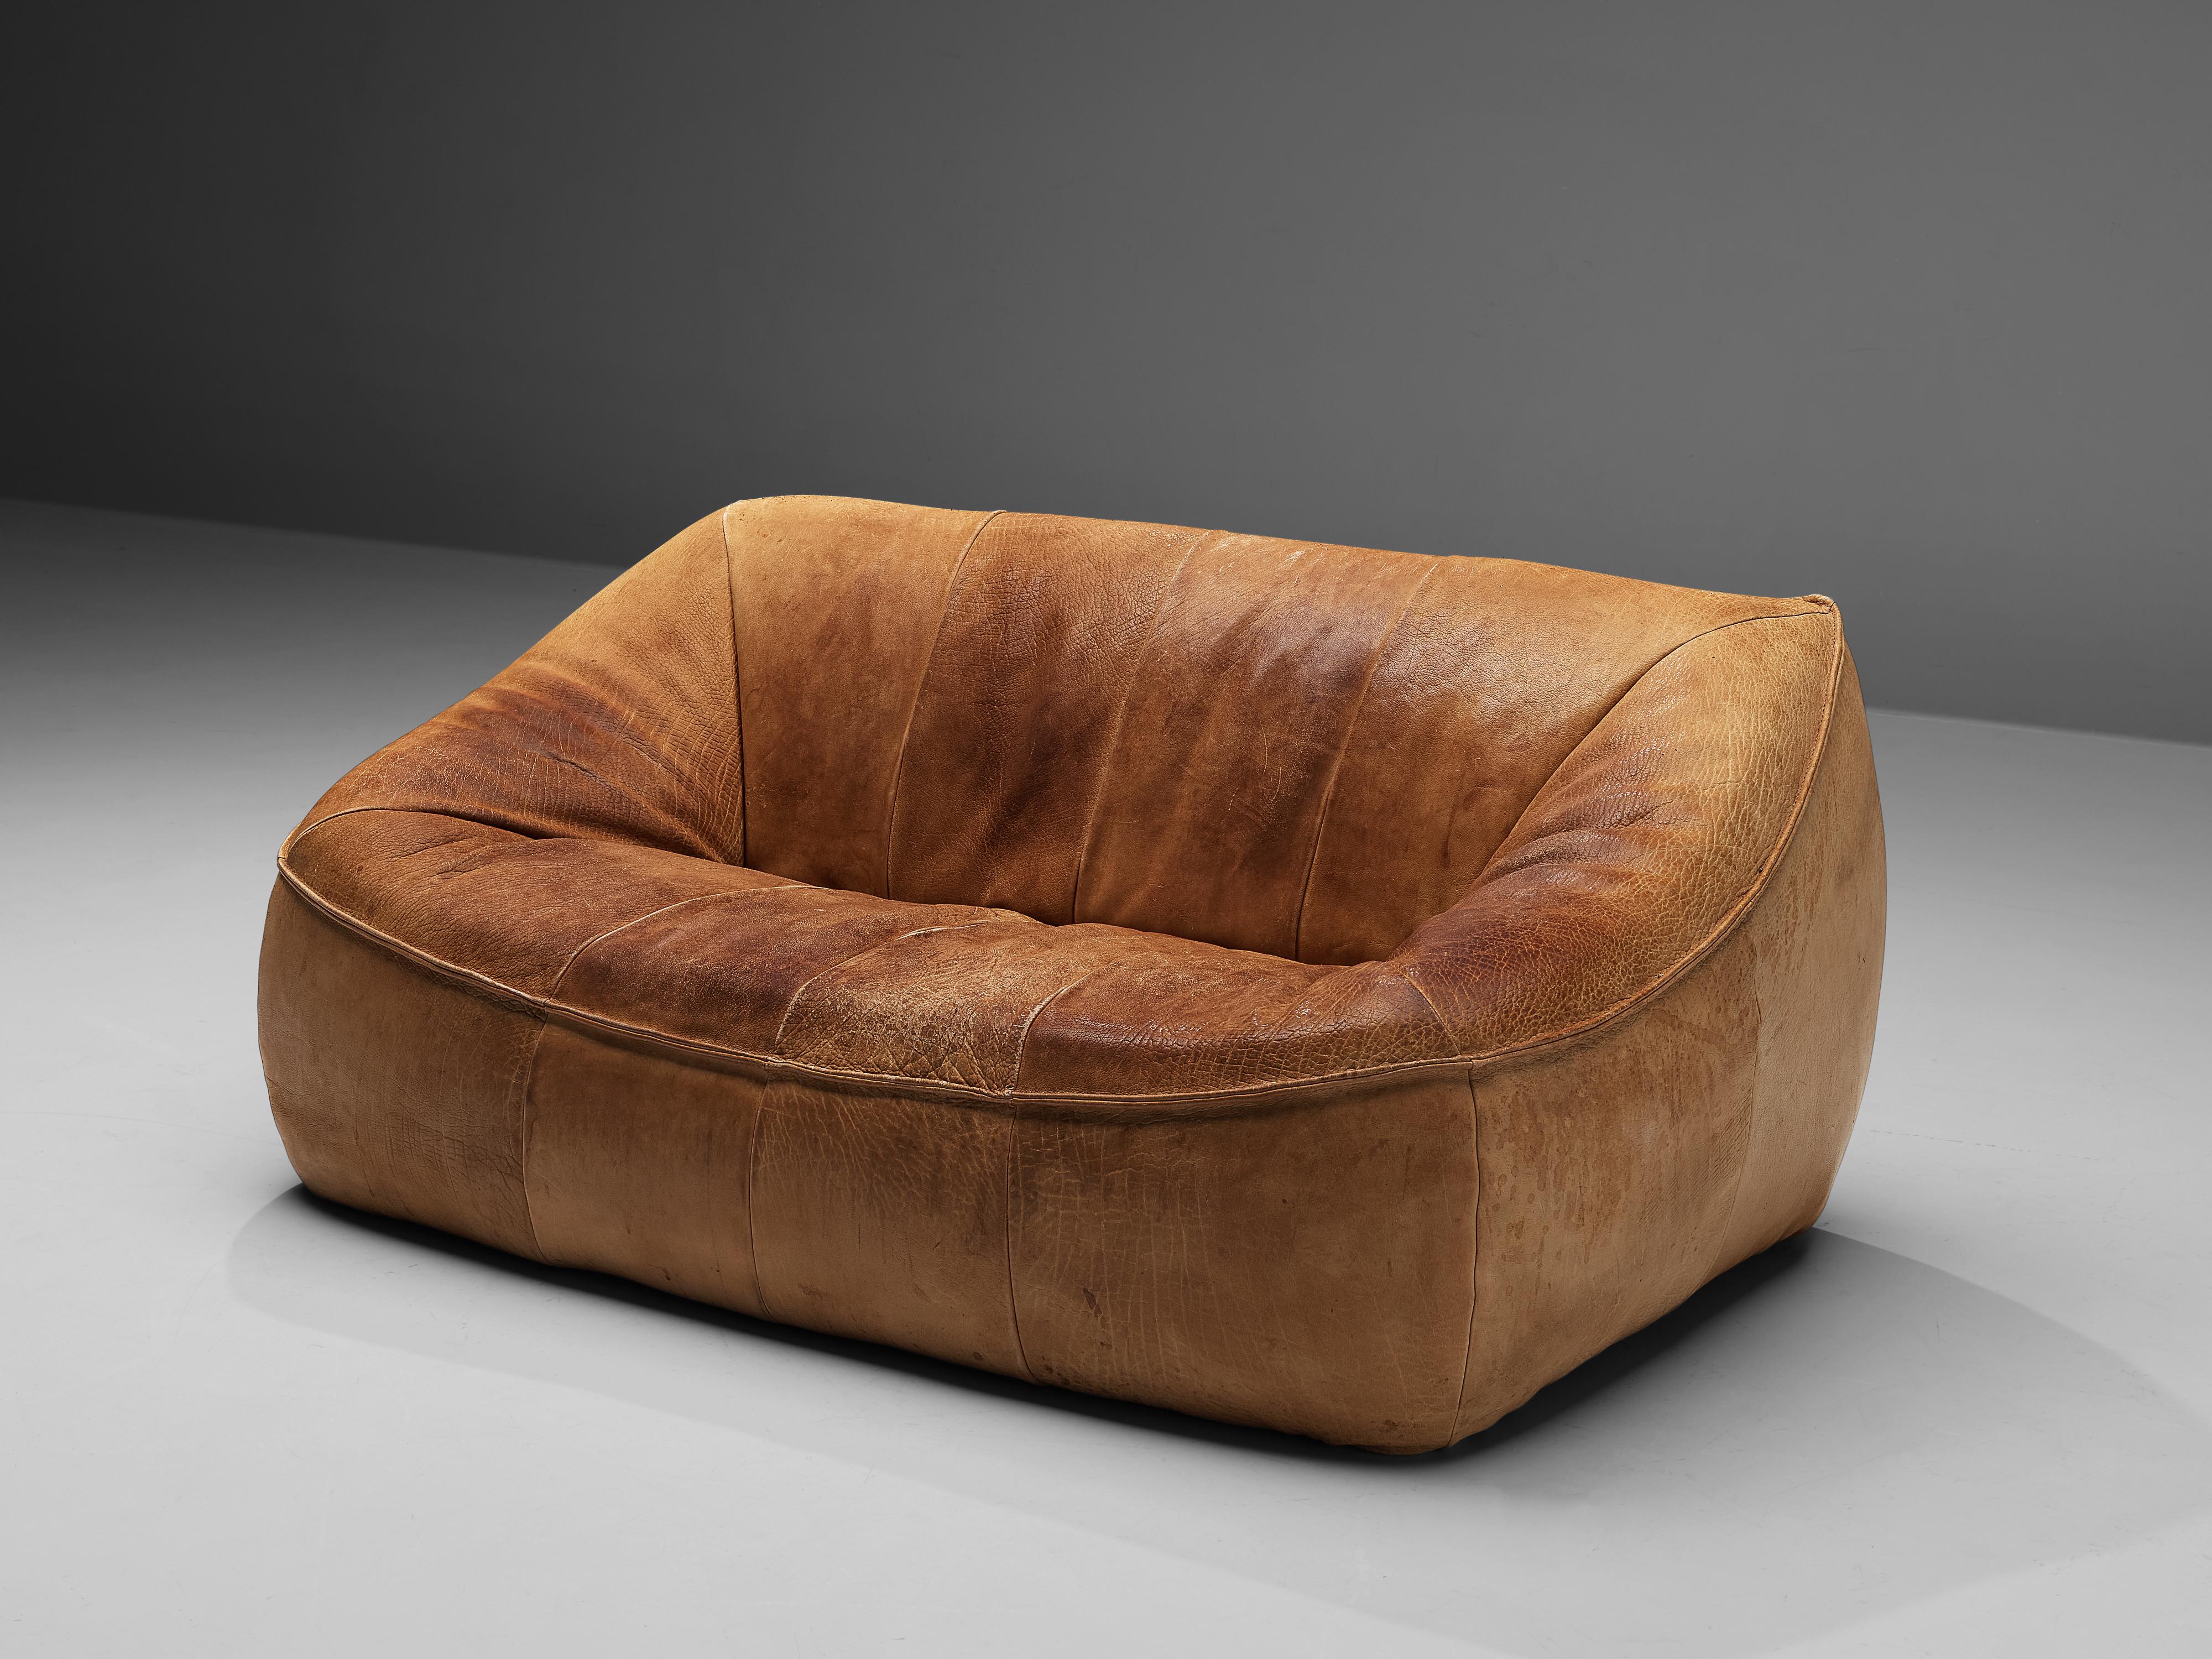 Gerard Van Den Berg for Montis, 'Ringo' sofa, leather, The Netherlands, 1974

This bulky two-seat 'Ringo' sofa is designed by the Dutch designer Gerard Van Den Berg. The sofa is comfortable and shaped as a large cushion. The absence of straight